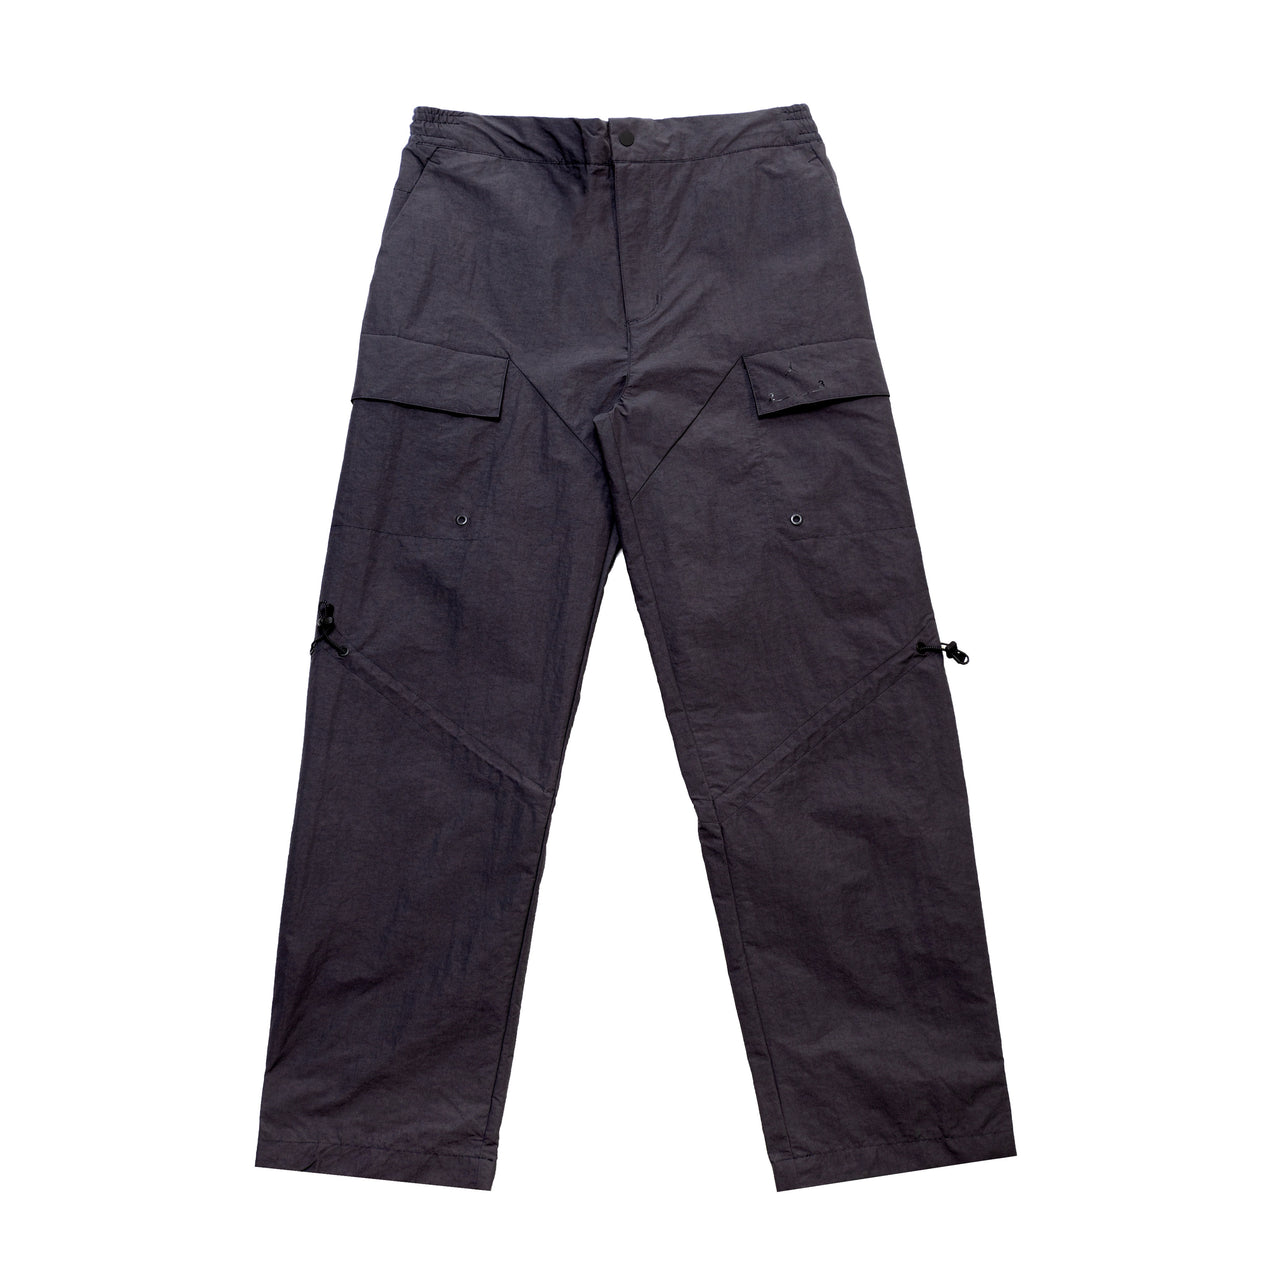 23 ENGINEERED STATEMENT WOVEN PANT